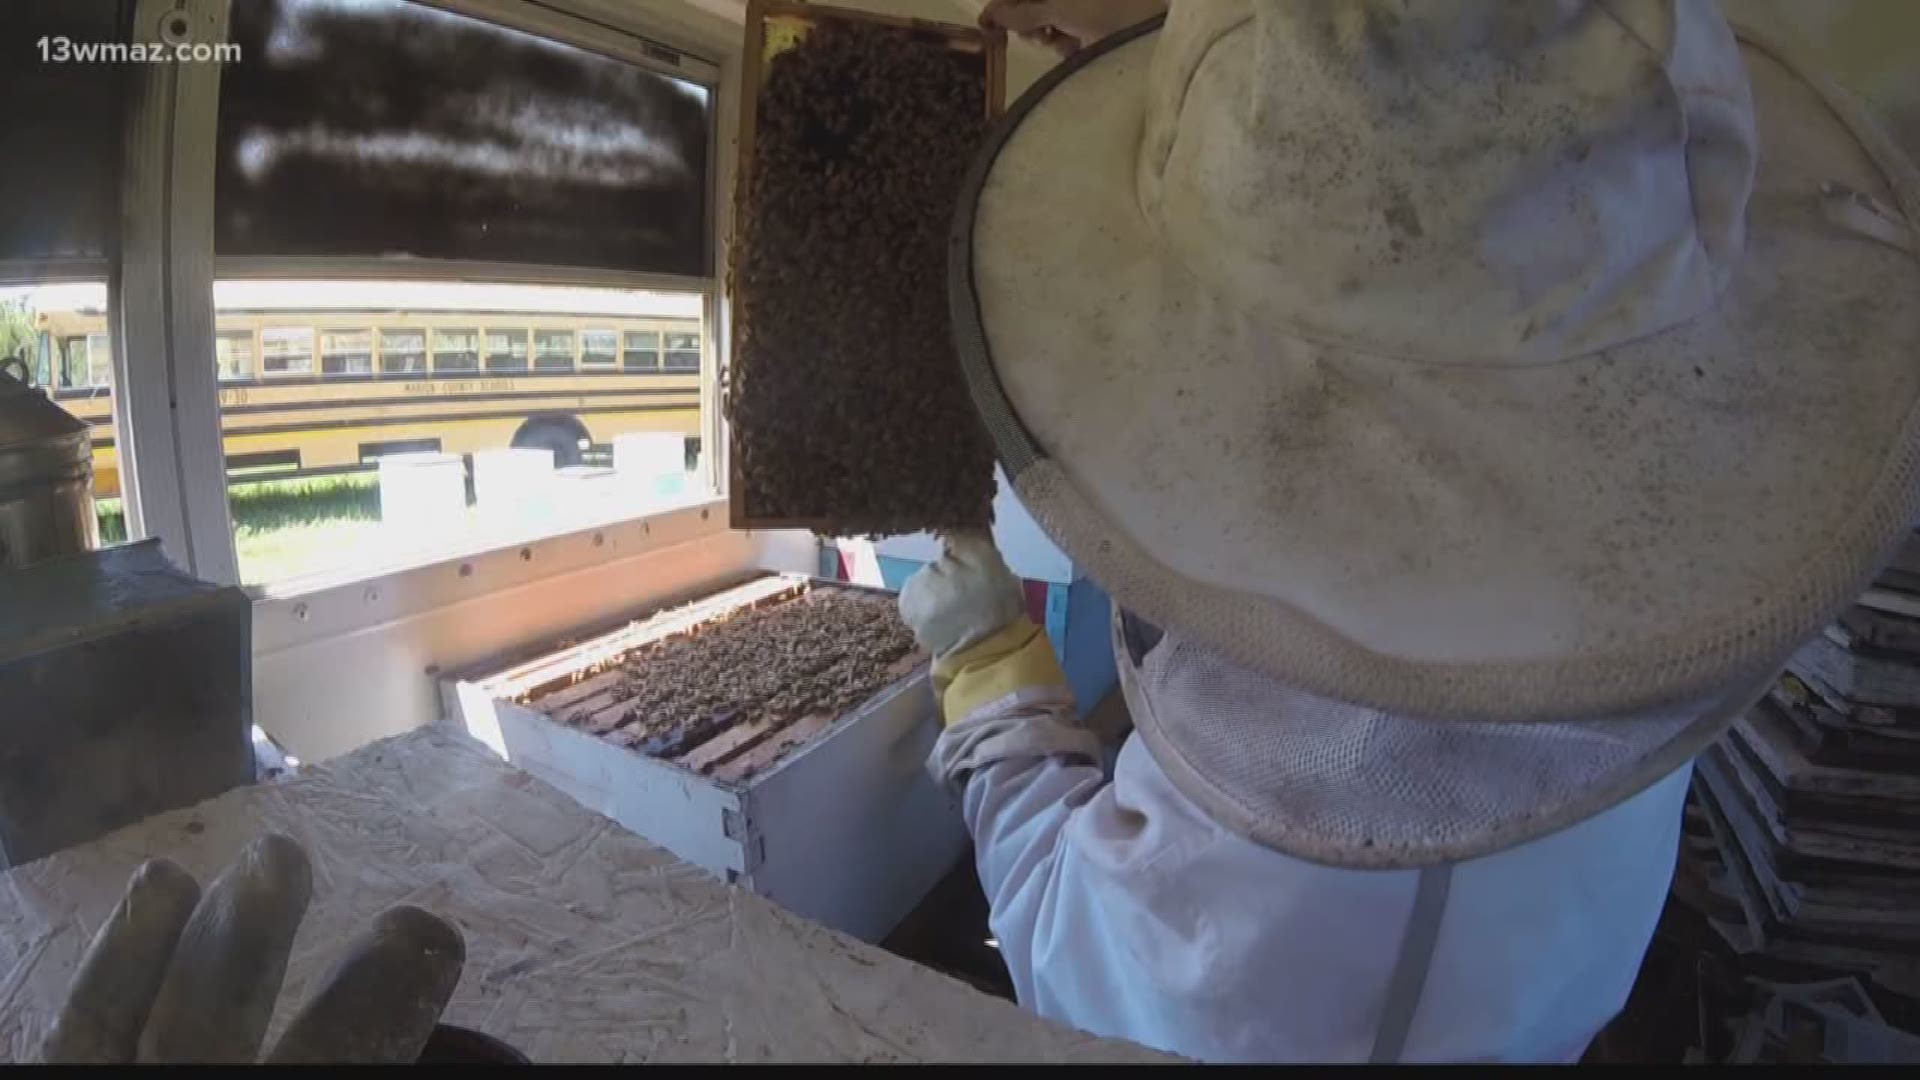 Beekeeper transports bees by bus